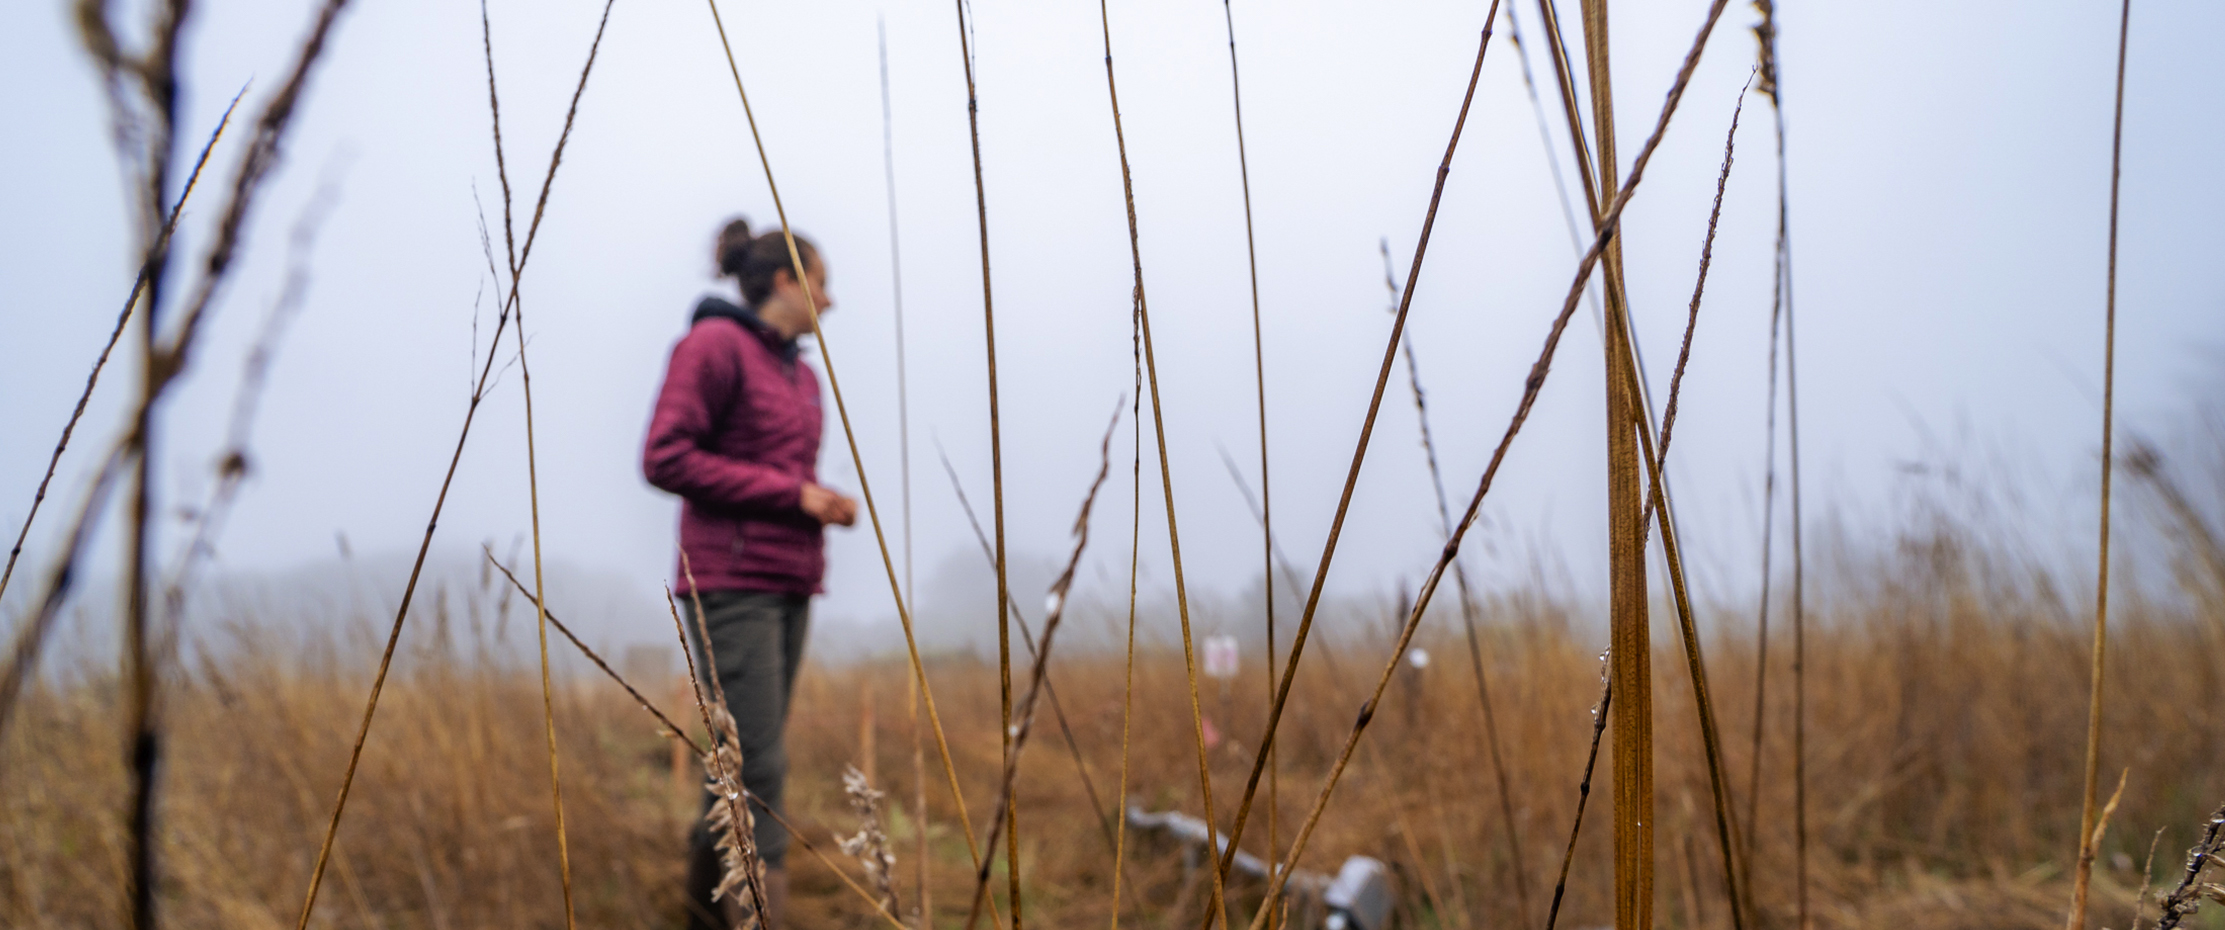 Blades of tall grass fill the frame while a female scientist looks out over a foggy grassland in the background